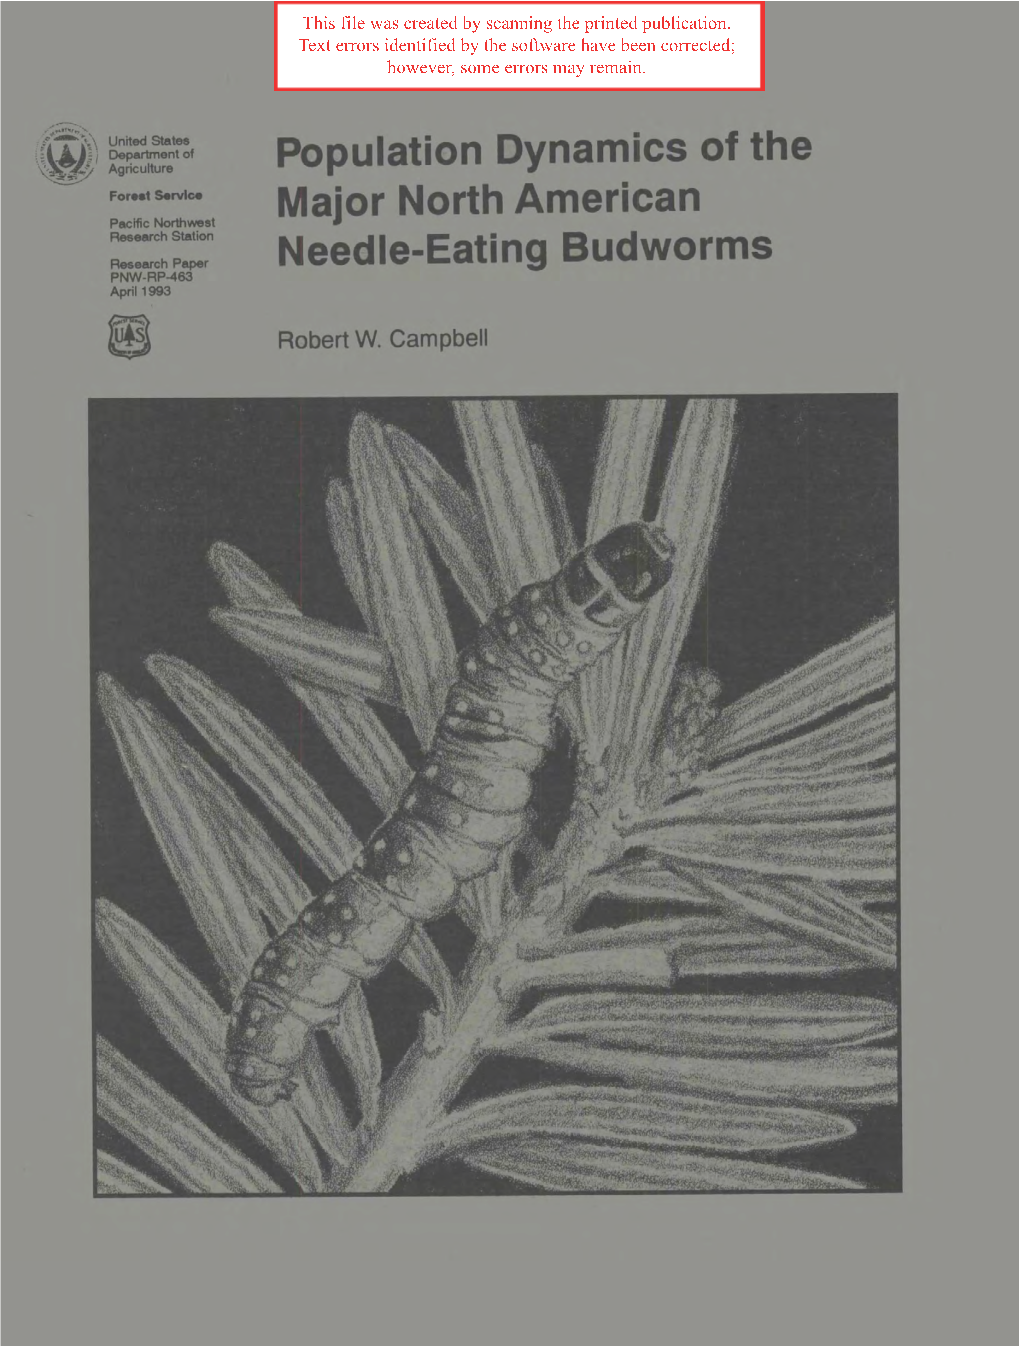 Population Dynamics of the Major North American Needle-Eating Budworms